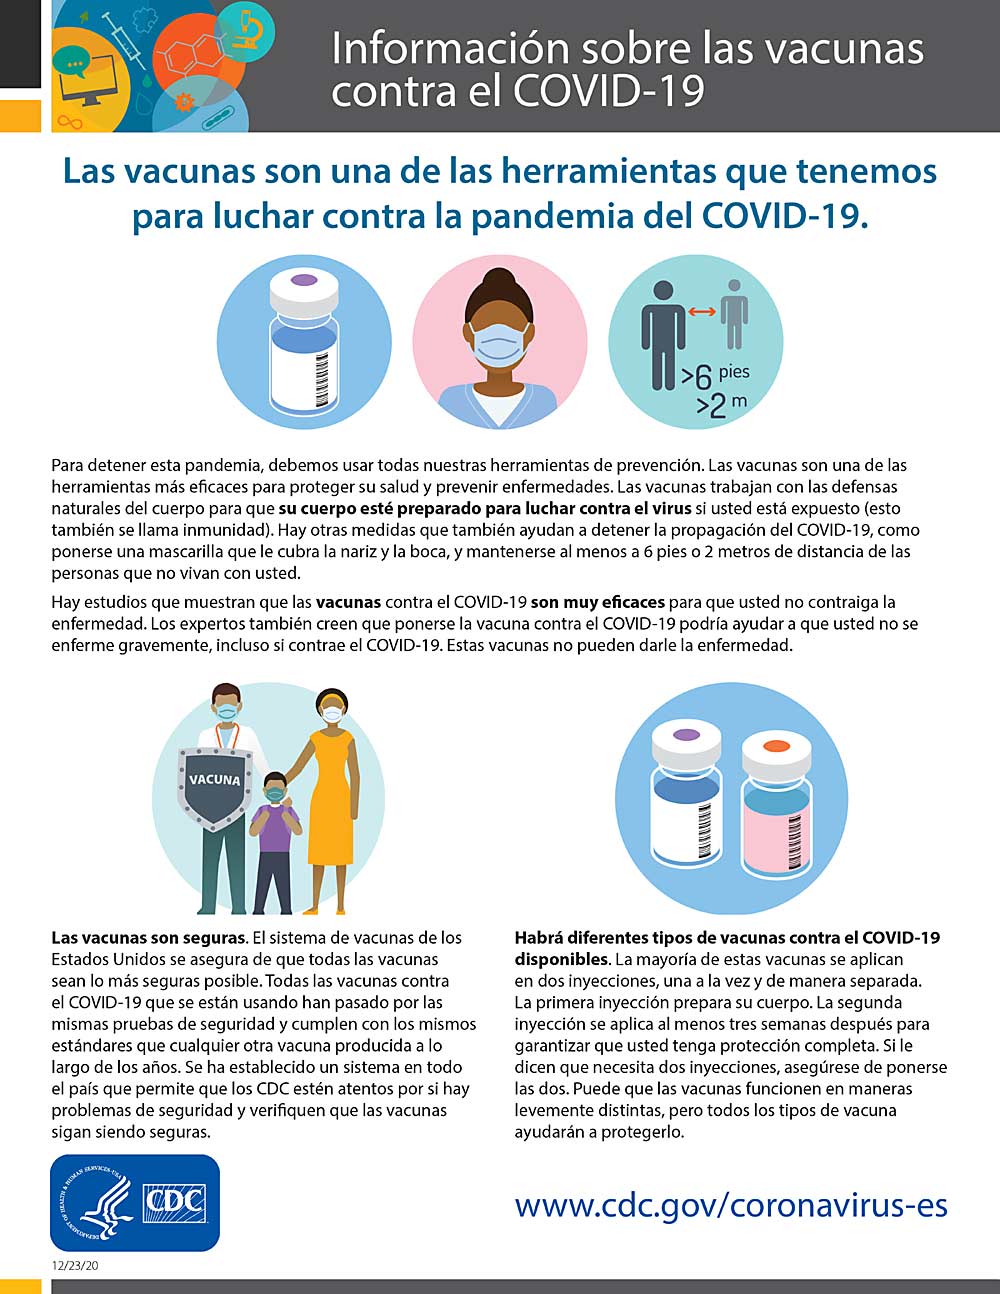 The U.S. Centers for Disease Control have published workplace posters in several languages for employers to use to communicate with their workers about the vaccine. (Courtesy U.S. Centers for Disease Control)